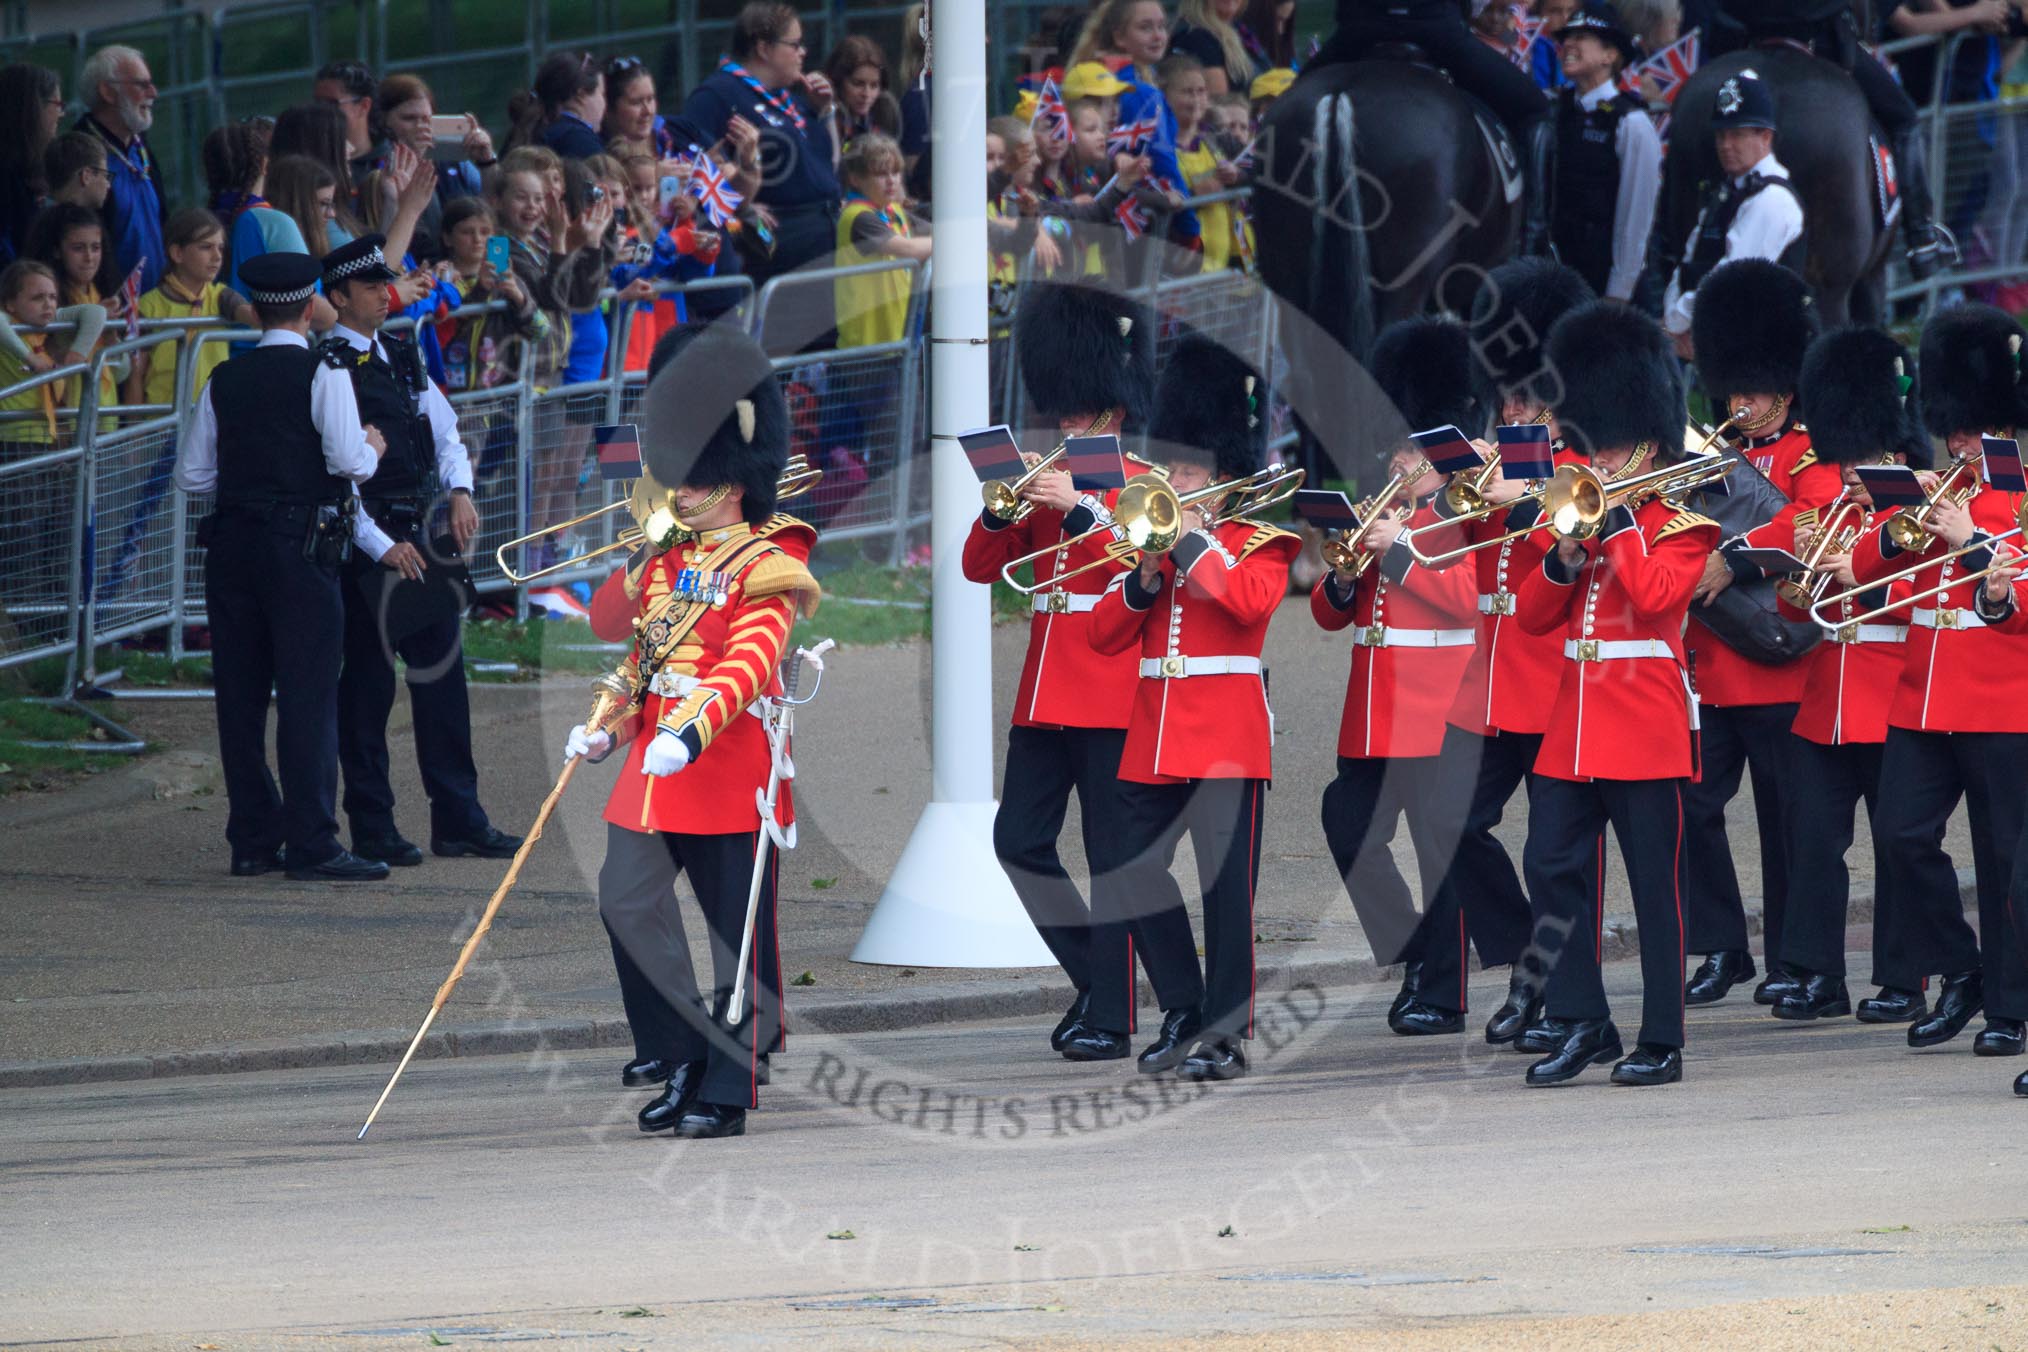 The Band of the Welsh Guards marching from The Mall to Horse Guards Parade, past the Youth Enclosure, during The Colonel's Review 2018 (final rehearsal for Trooping the Colour, The Queen's Birthday Parade)  at Horse Guards Parade, Westminster, London, 2 June 2018, 10:12.